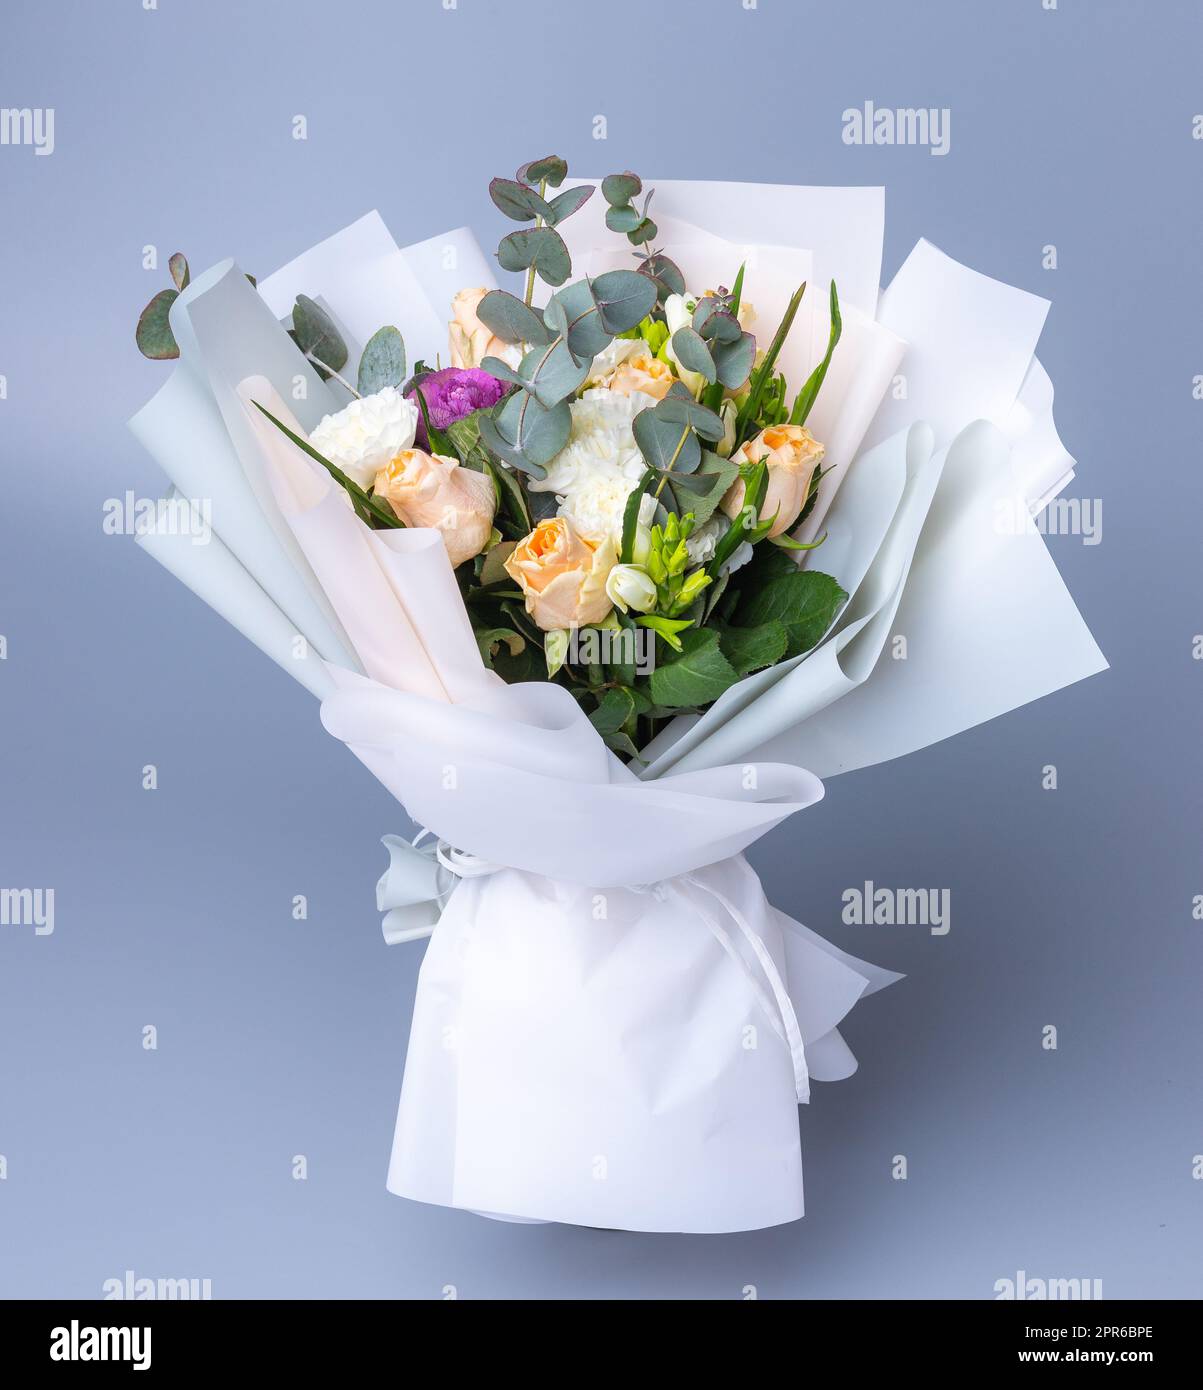 Delicate romantic bouquet of flowers wrapped in white paper. Stock Photo